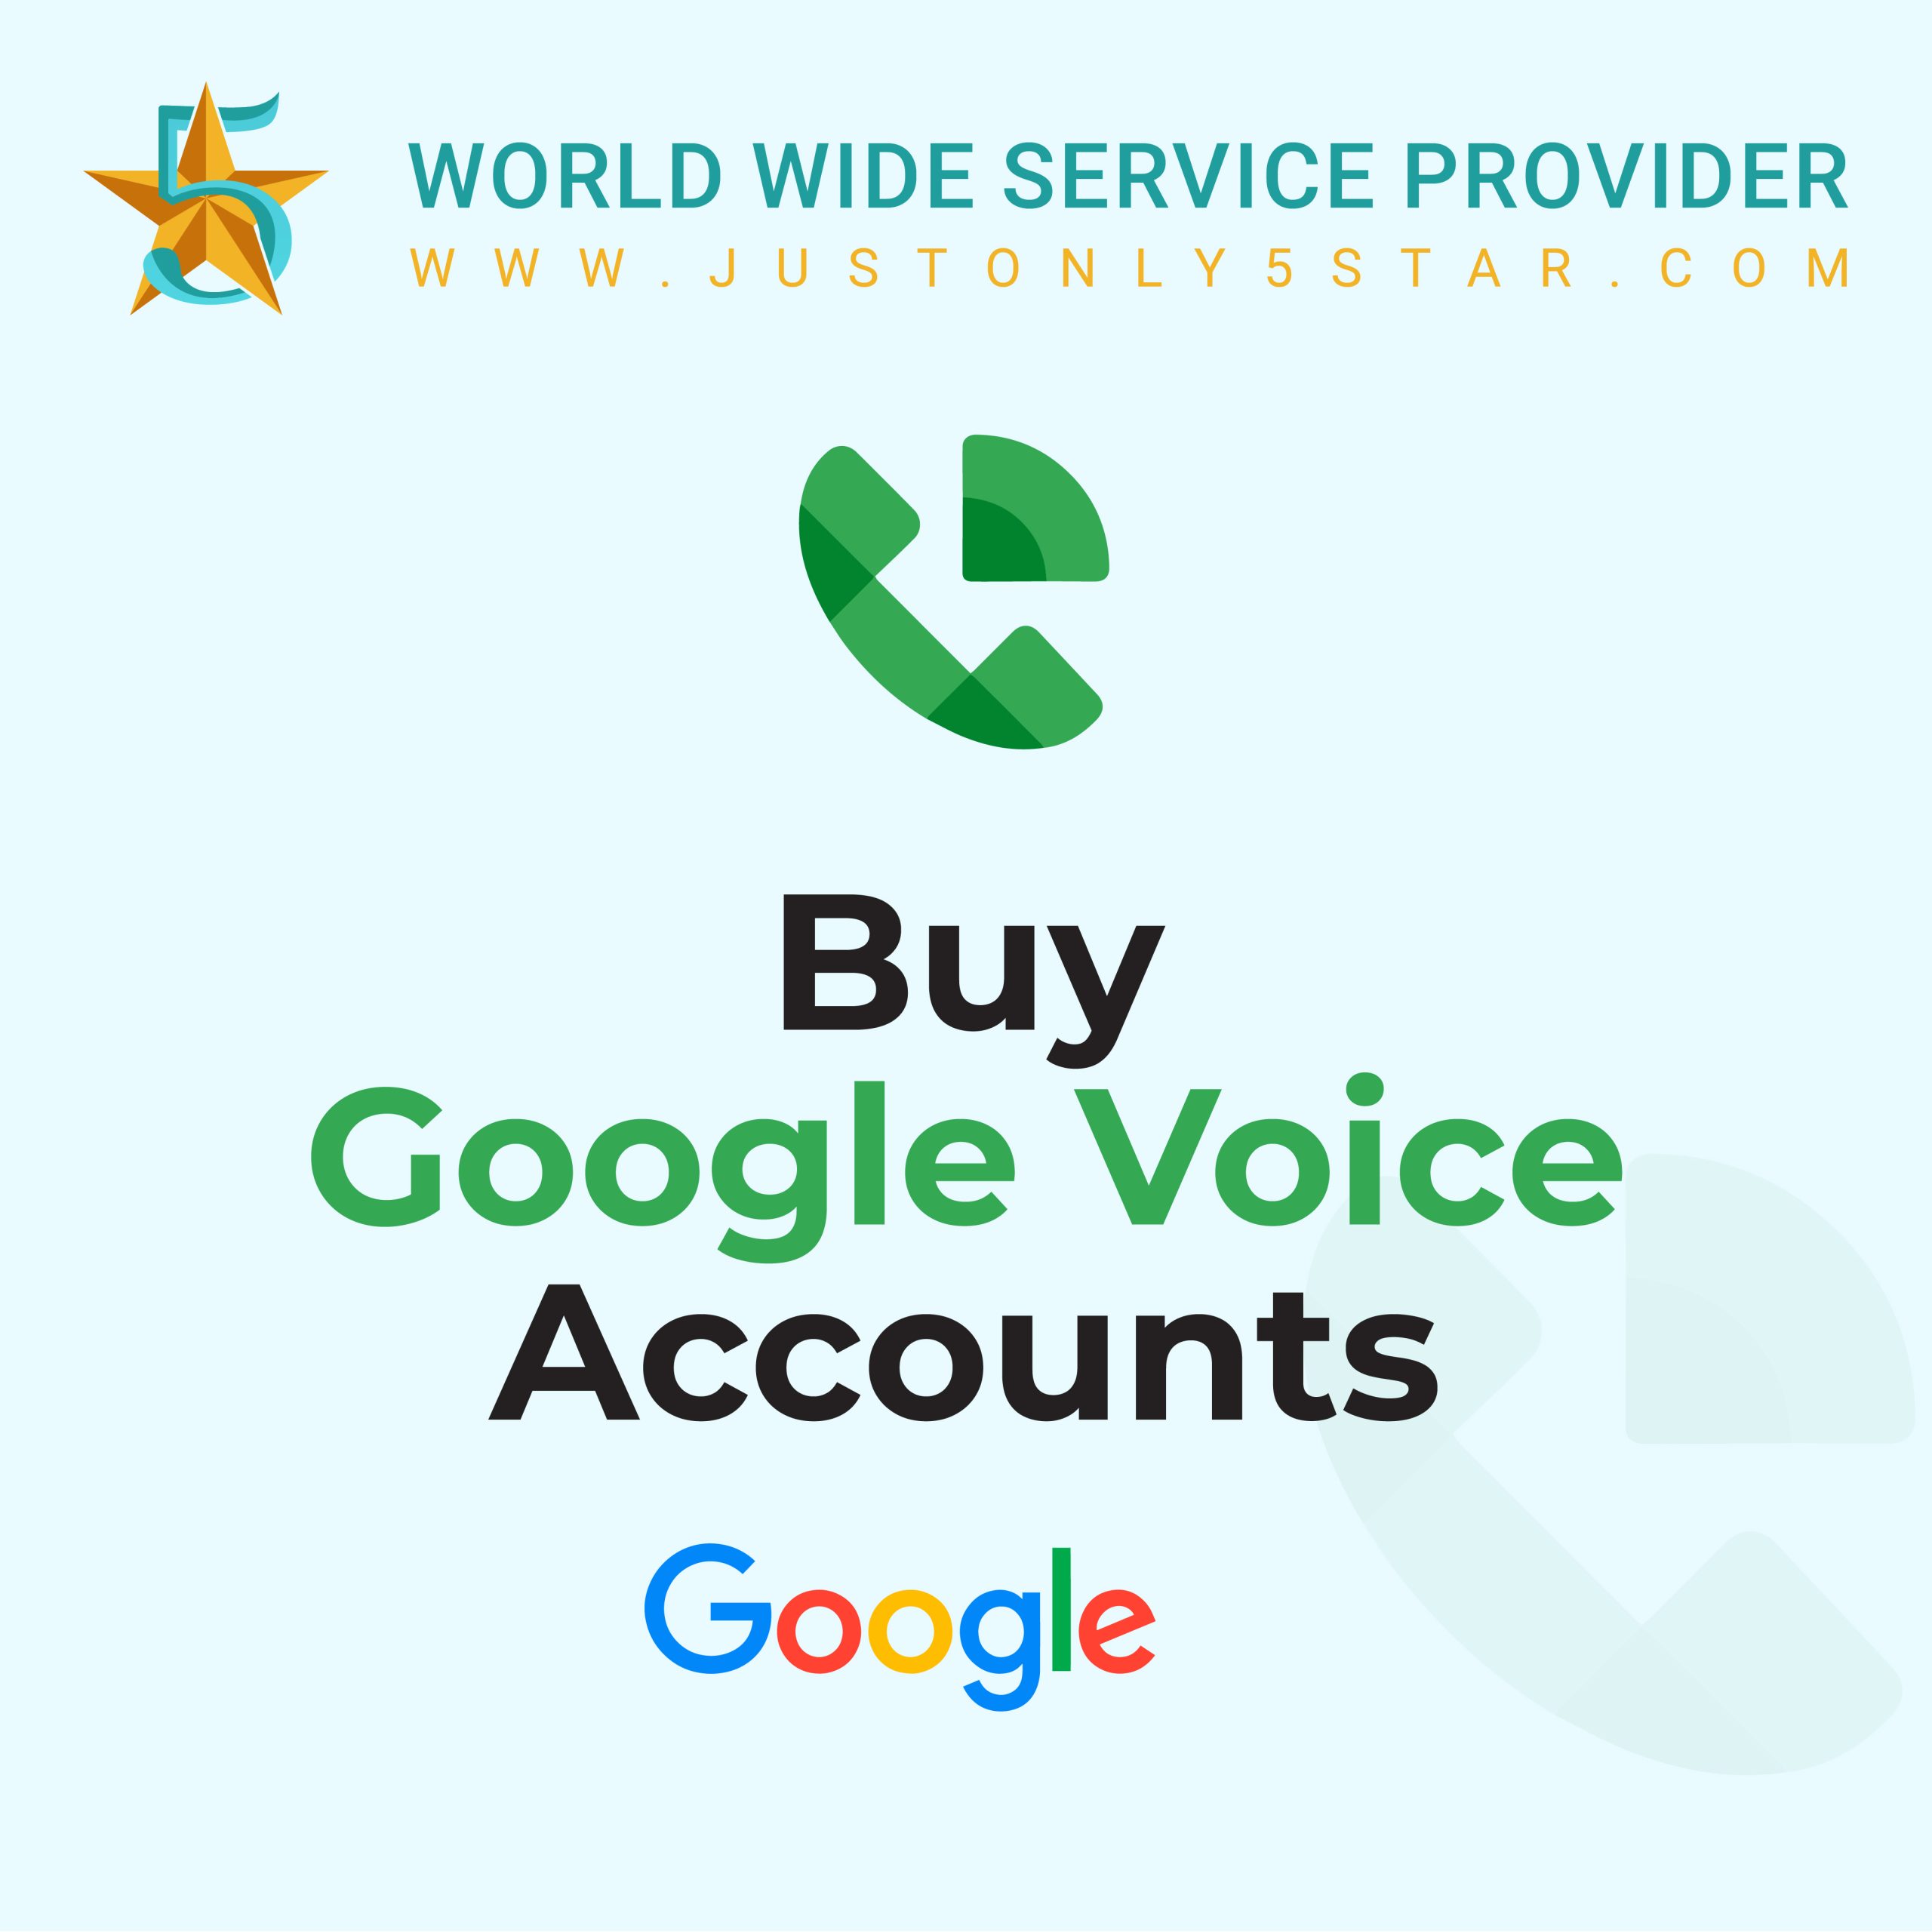 Buy Google Voice Accounts - 100% Verified & Trusted Provider...